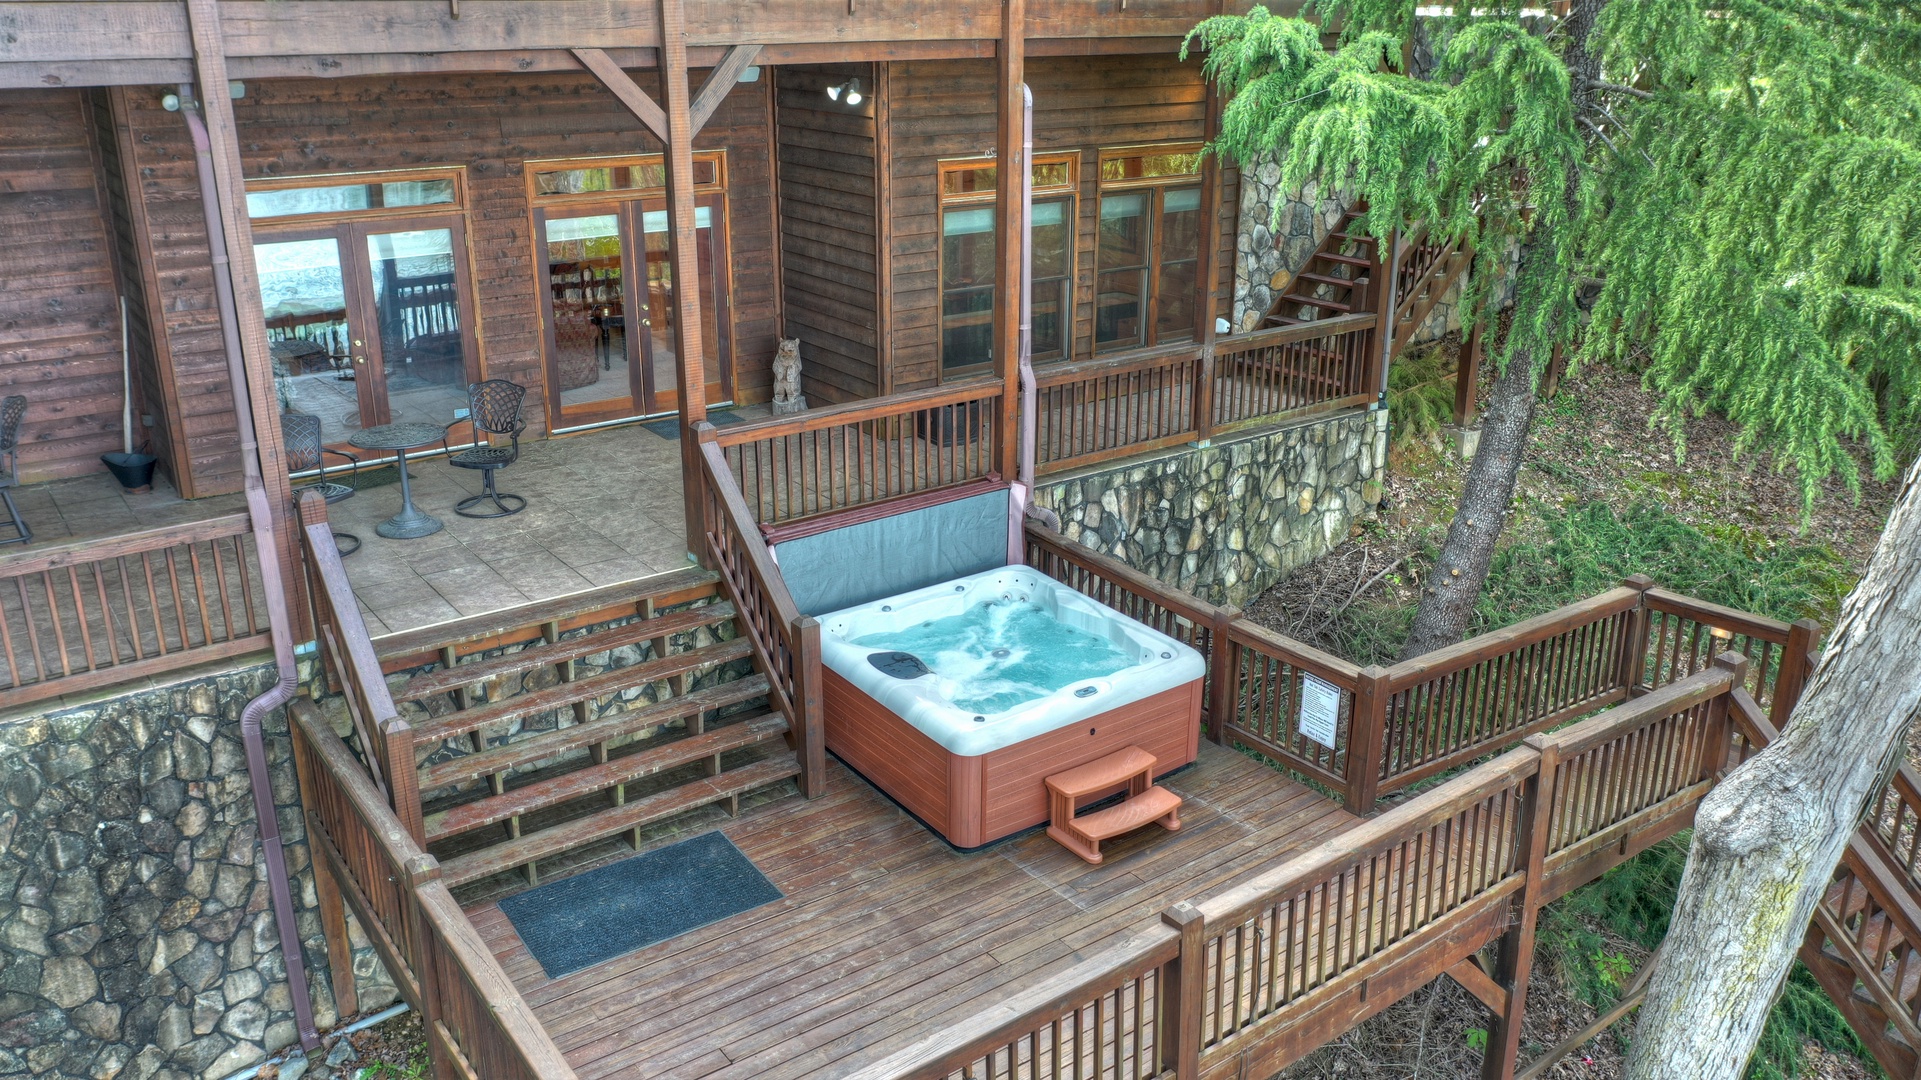 When In Rome - Overview of the deck with a hot tub